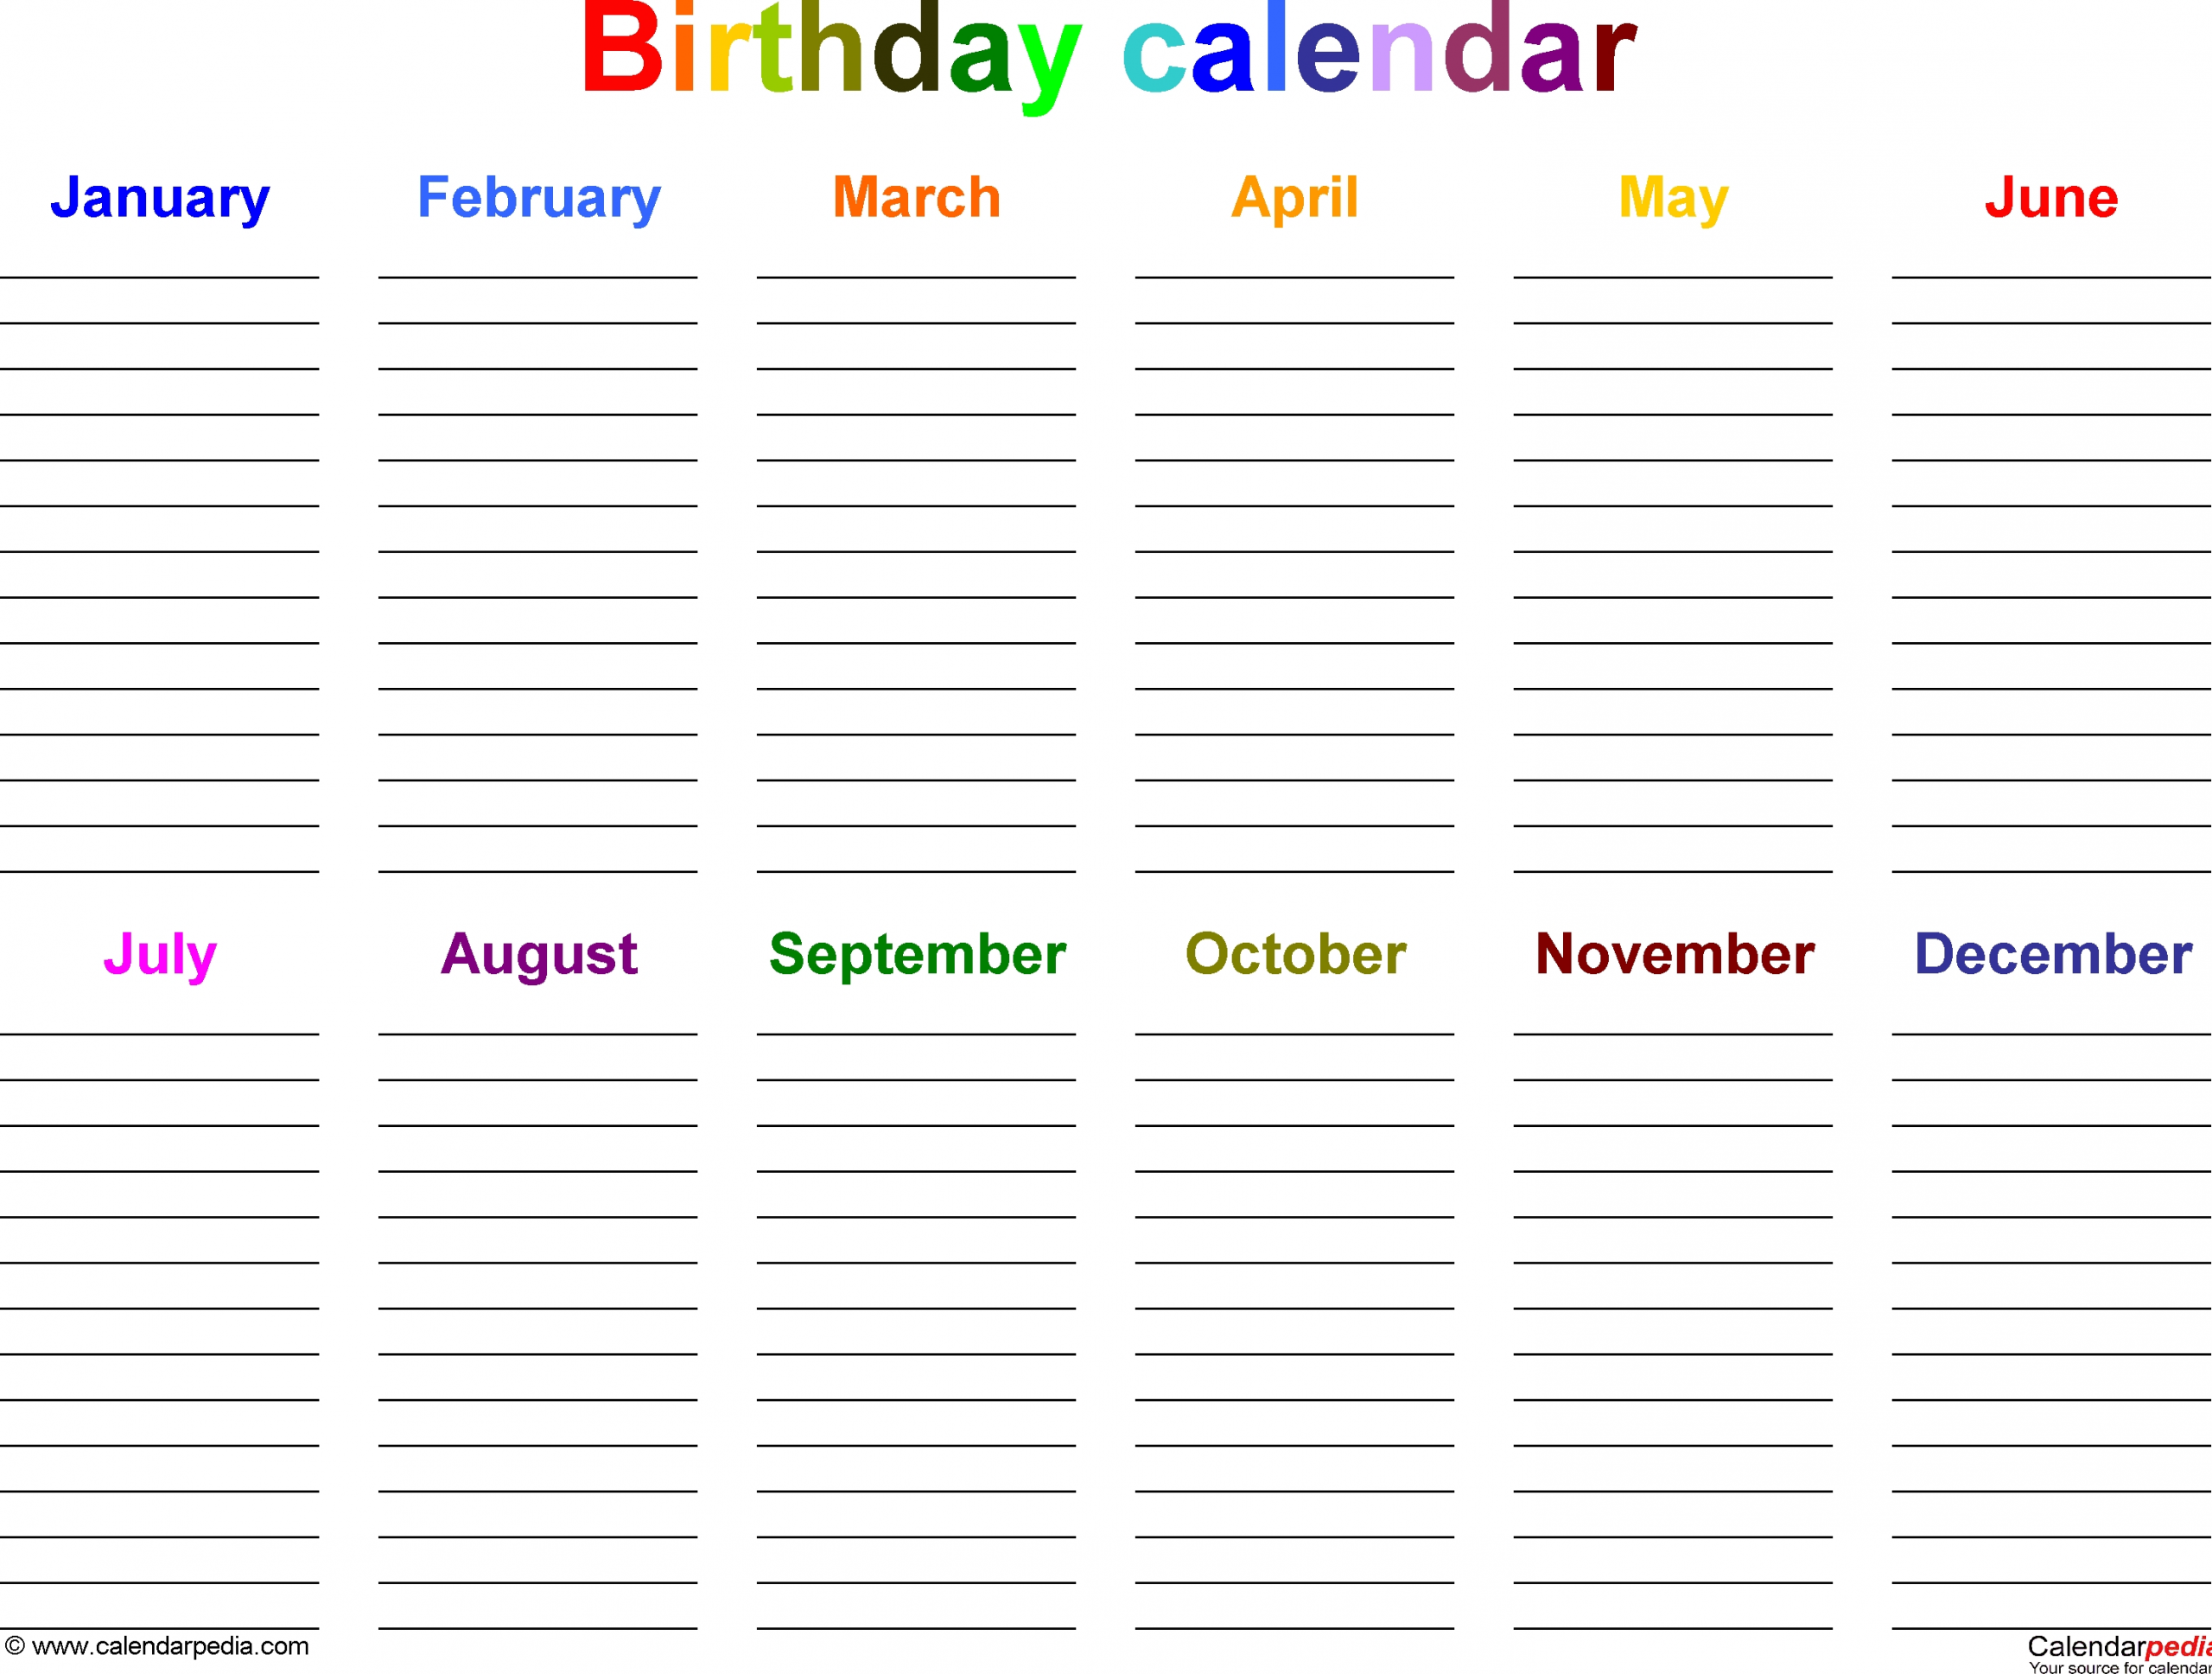 Excel Template For Birthday Calendar In Color (Landscape